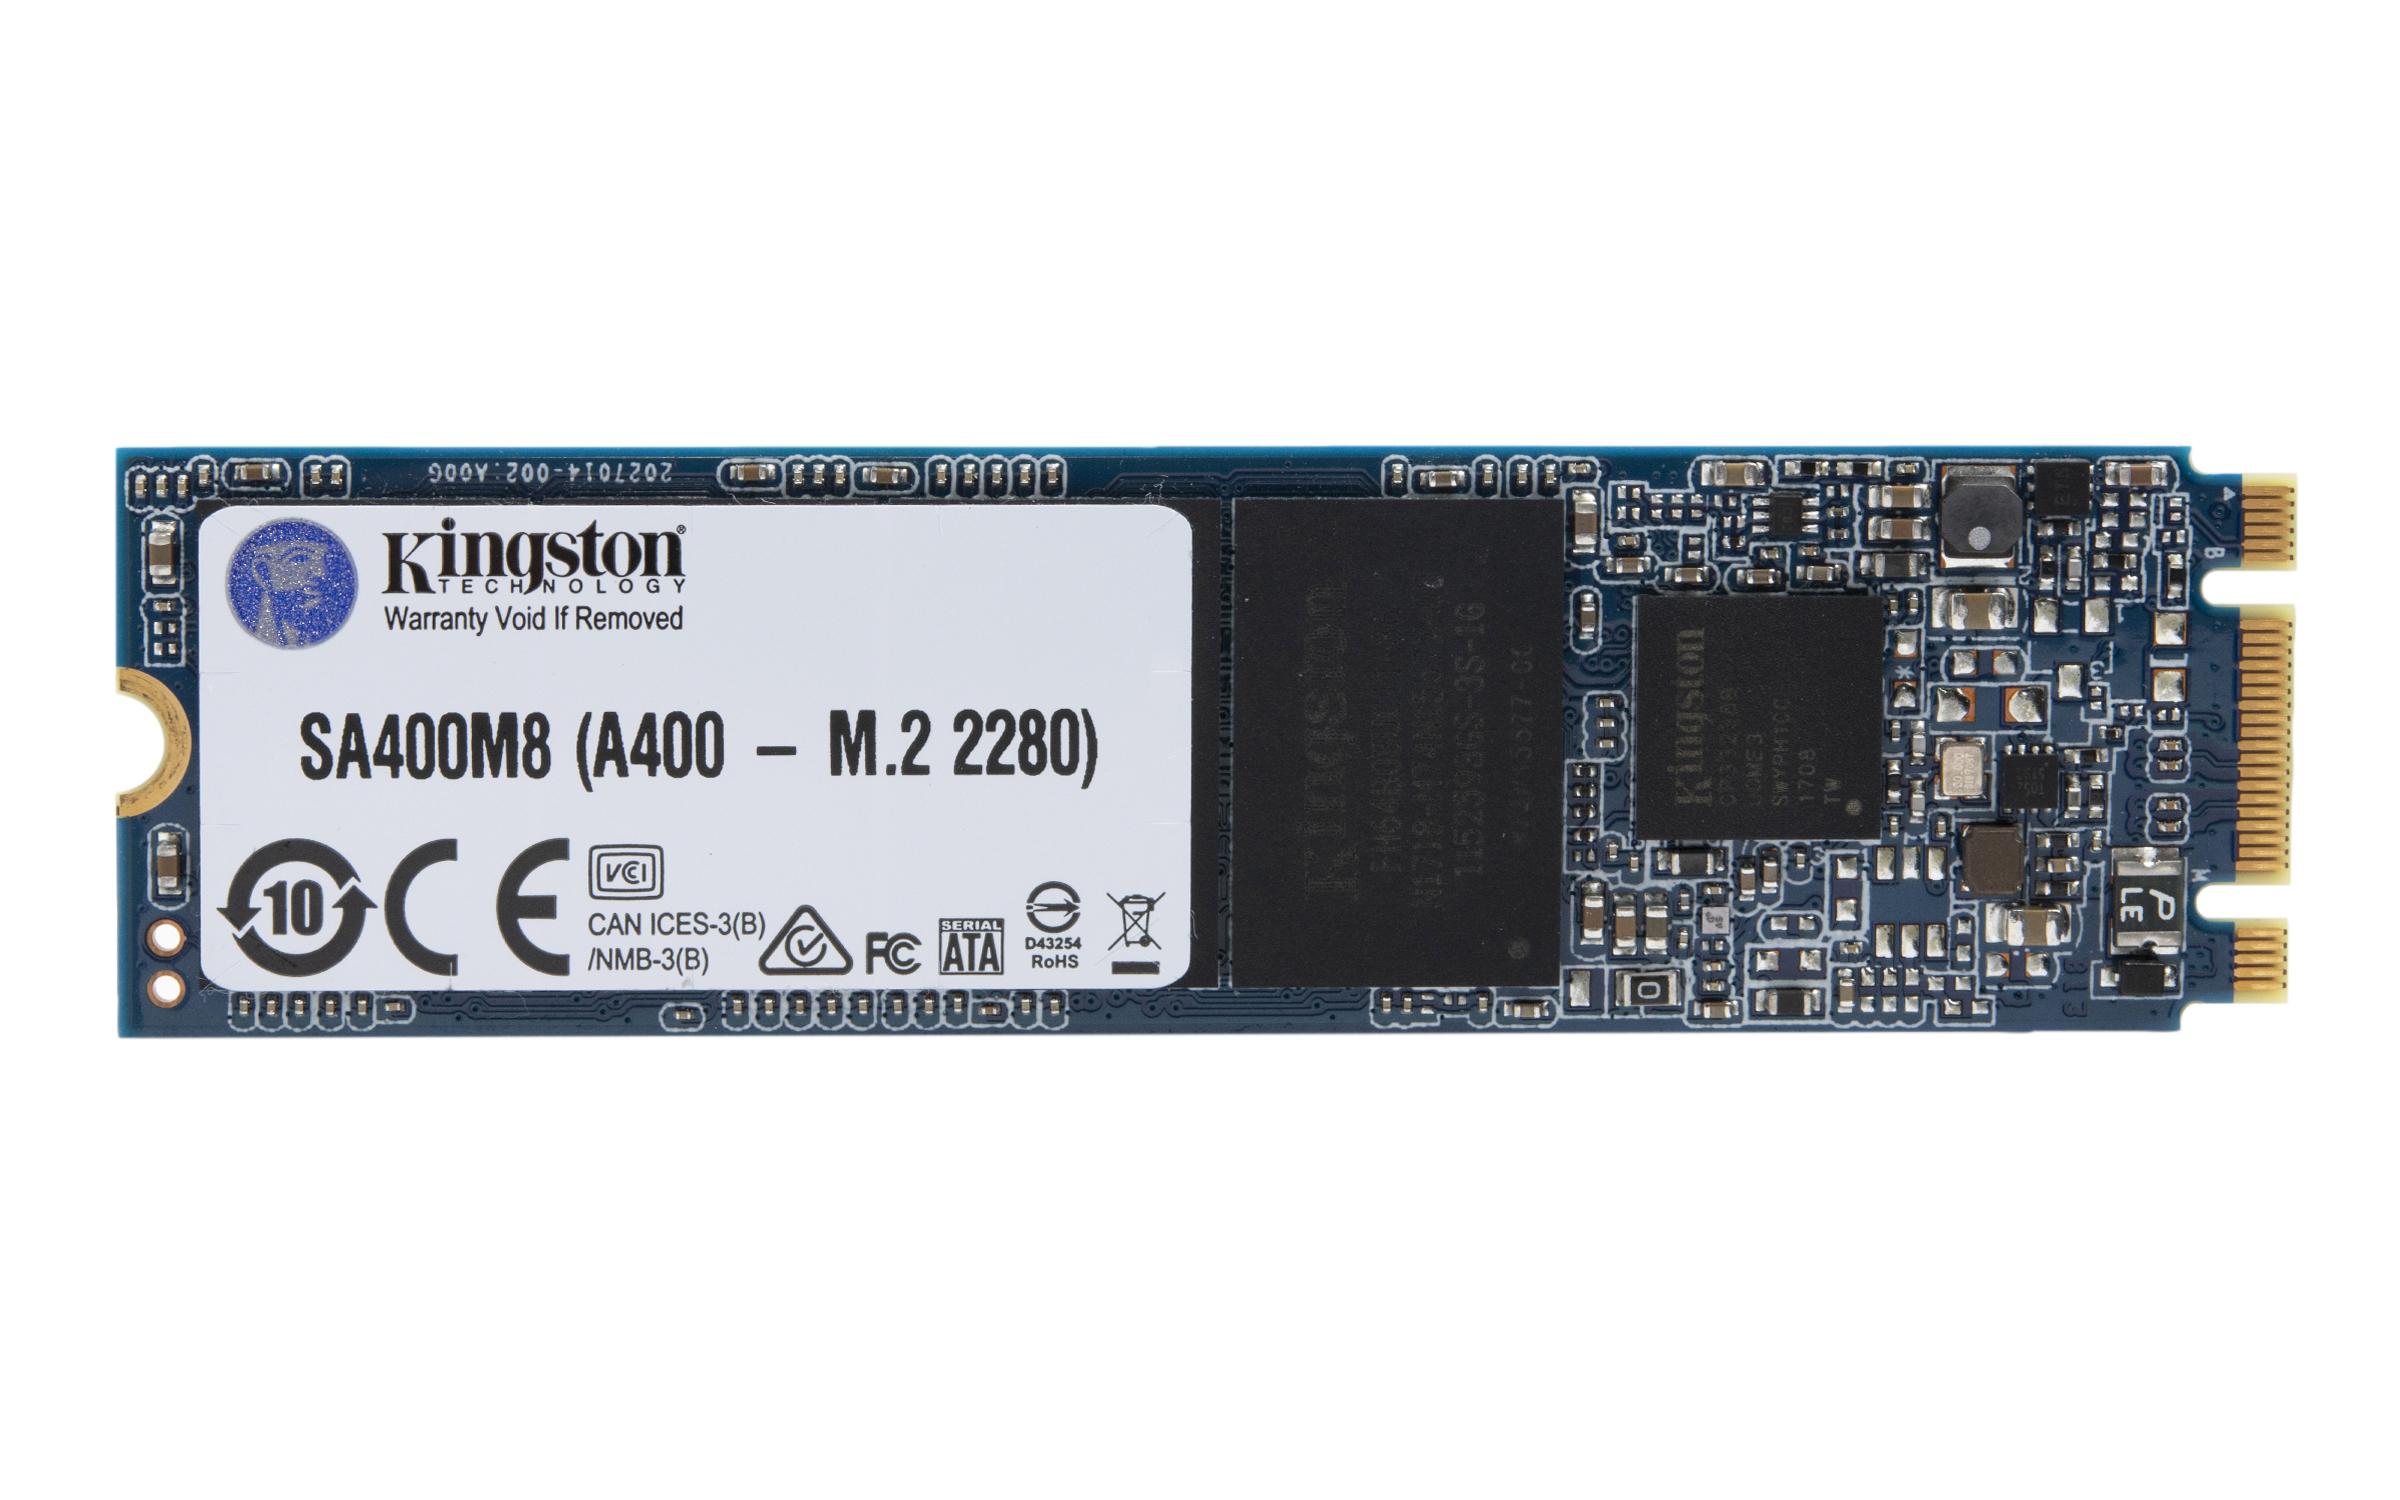 Solid State Drive (SSD) KINGSTON A400, m.2 2280, 120GB